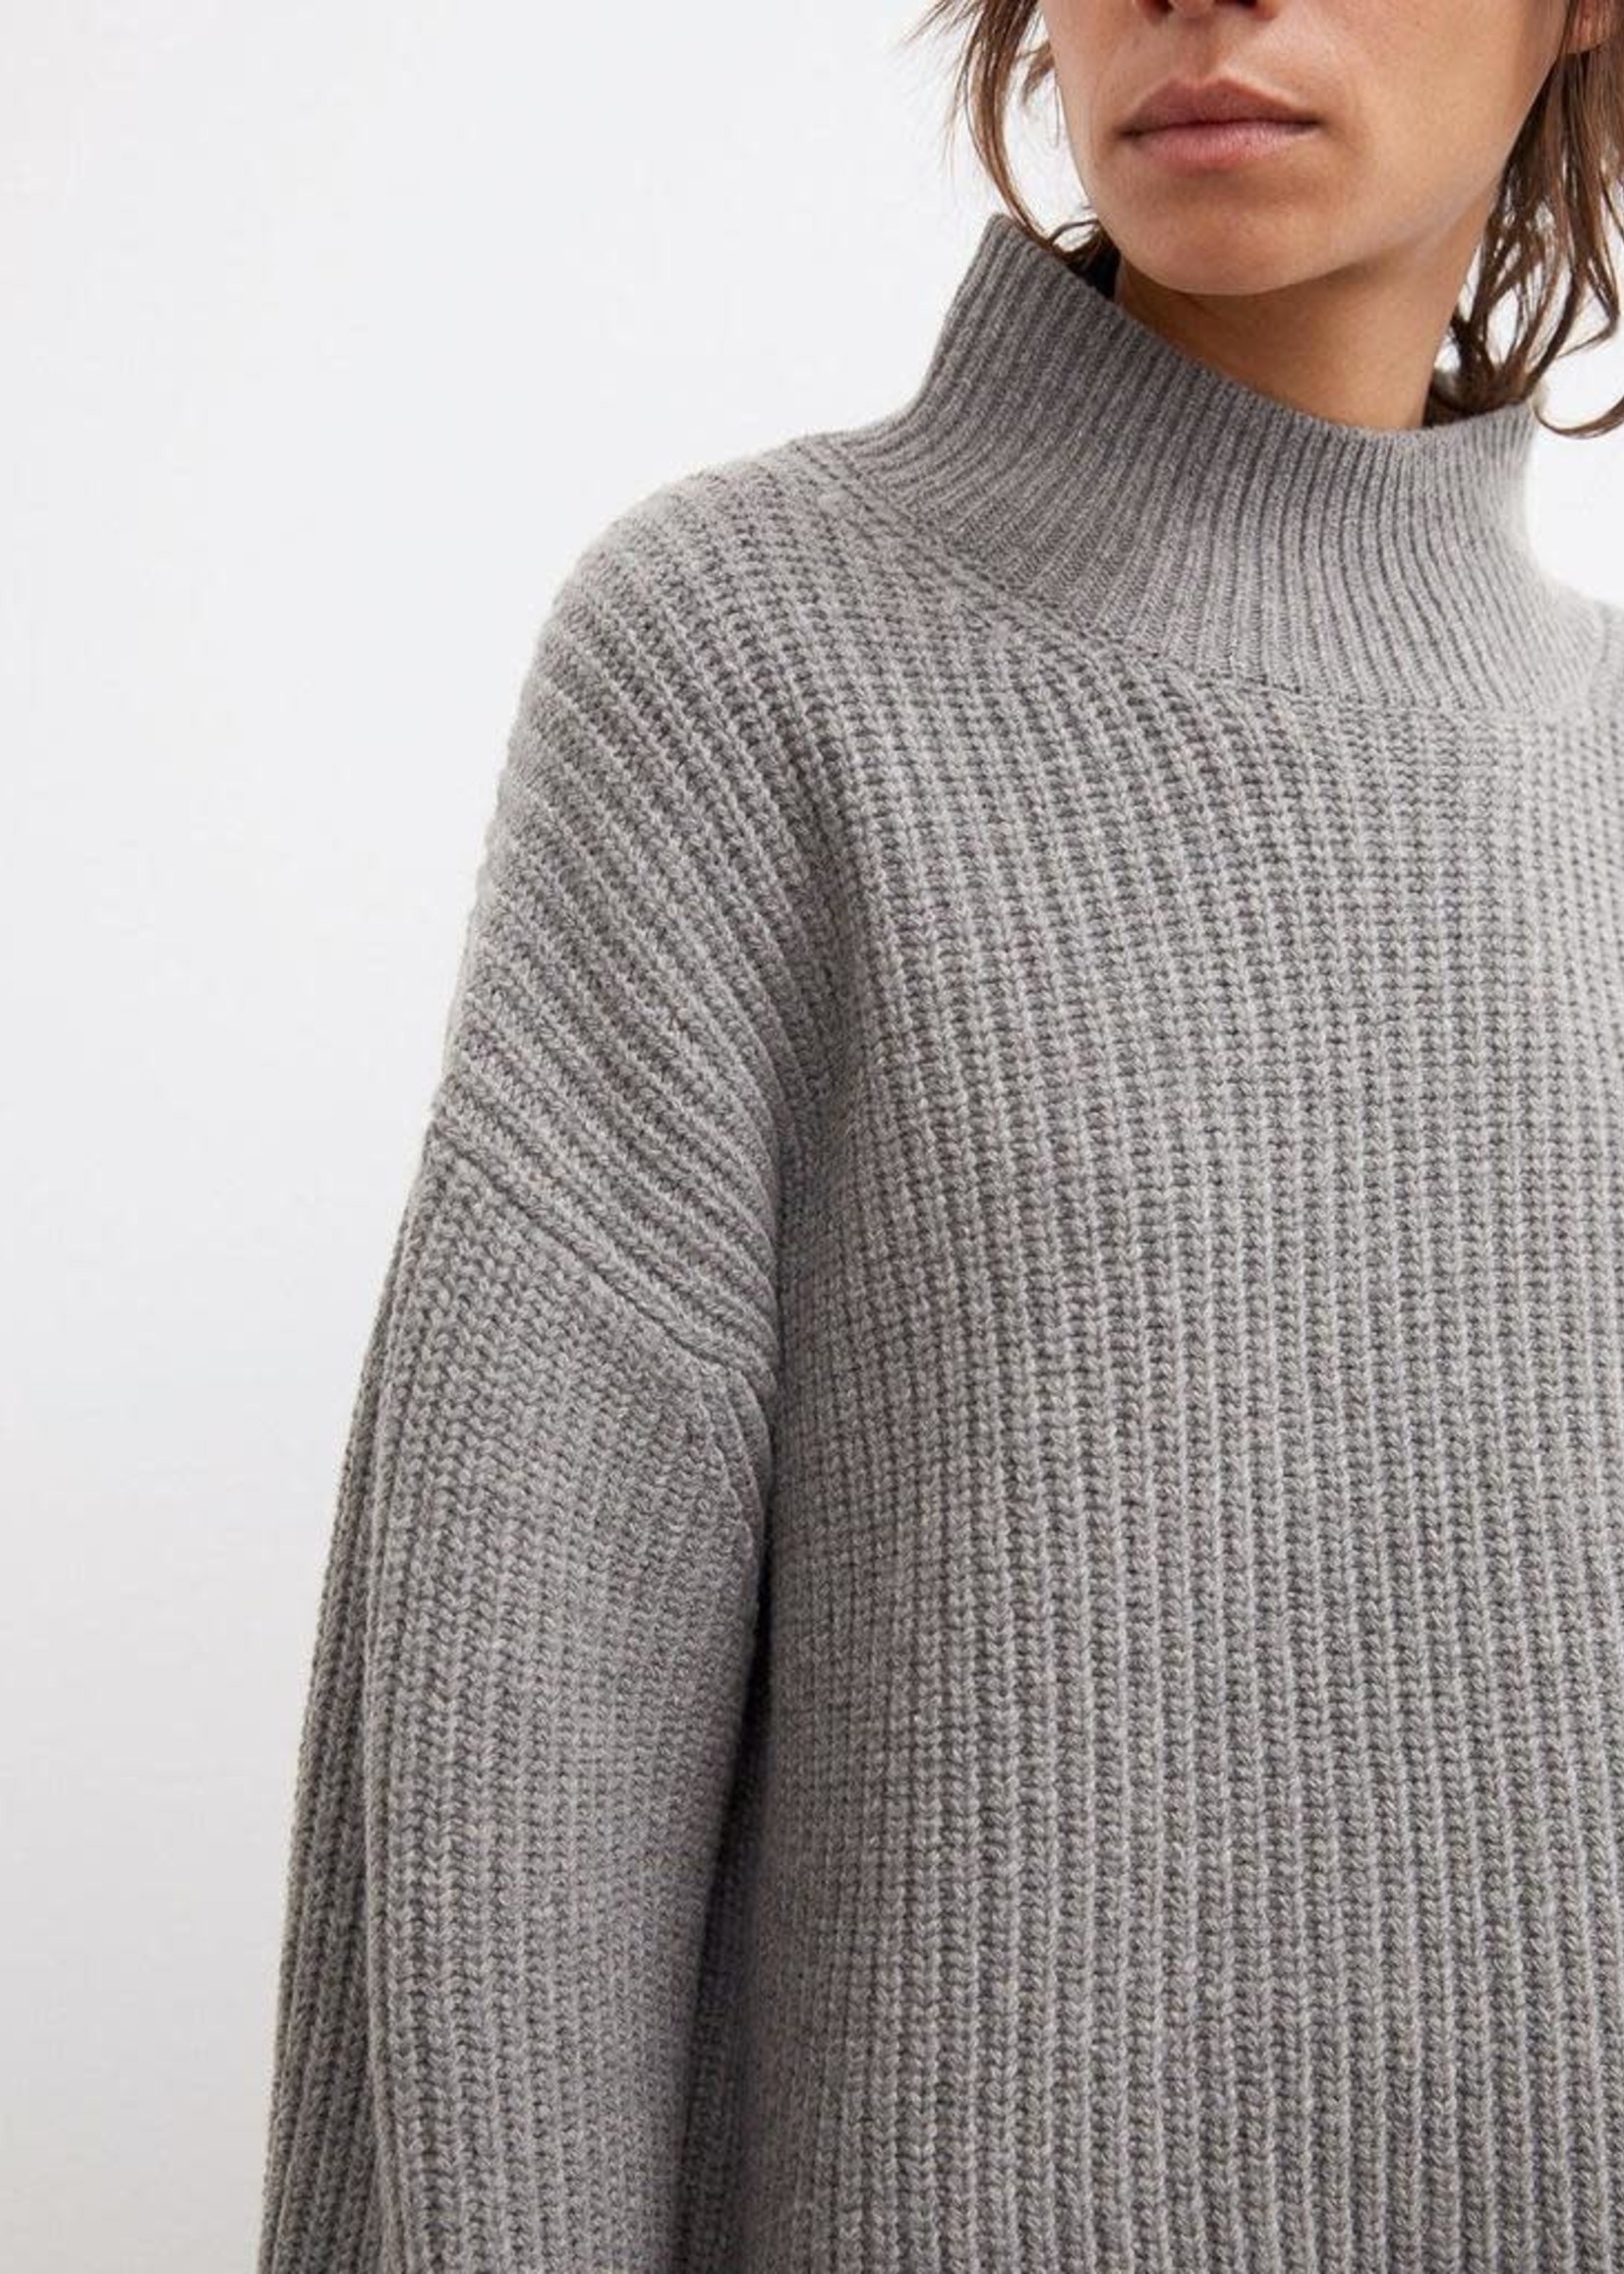 BY MALENE BIRGER DIOON SWEATER